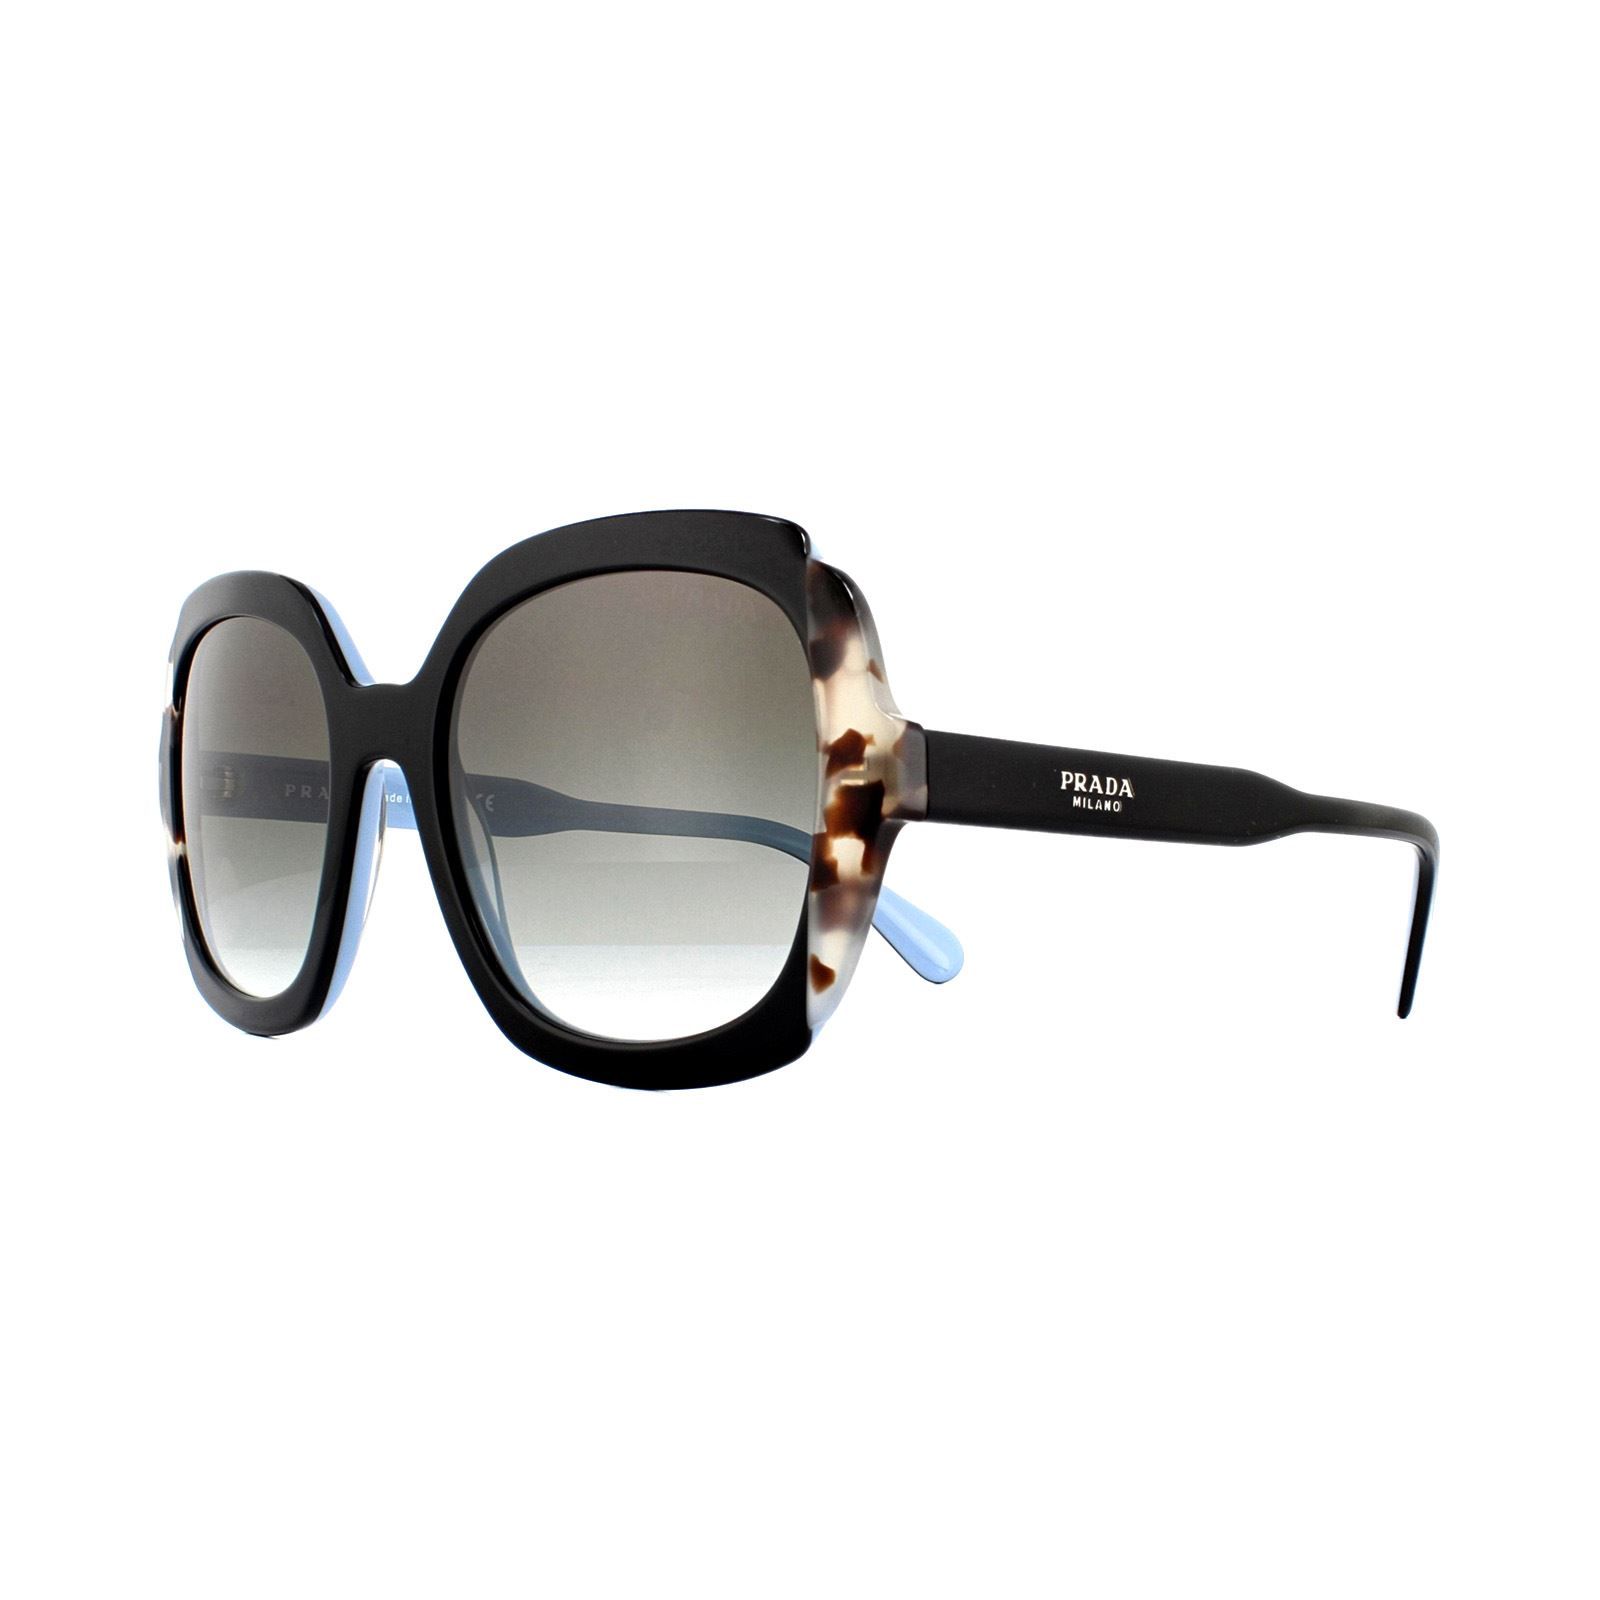 Prada Sunglasses PR 16US KHR0A7 Black Azure Spotted Brown Grey Gradient are a bold square shaped design with oversized lenses for women. The classic silhouette is crafted from thick acetate and features a contrasting coloured or patterned outer edge for a contemporary twist. Designed for the more daring fashion lover, an unexpected edge along the top will guarantee that you always draw attention.